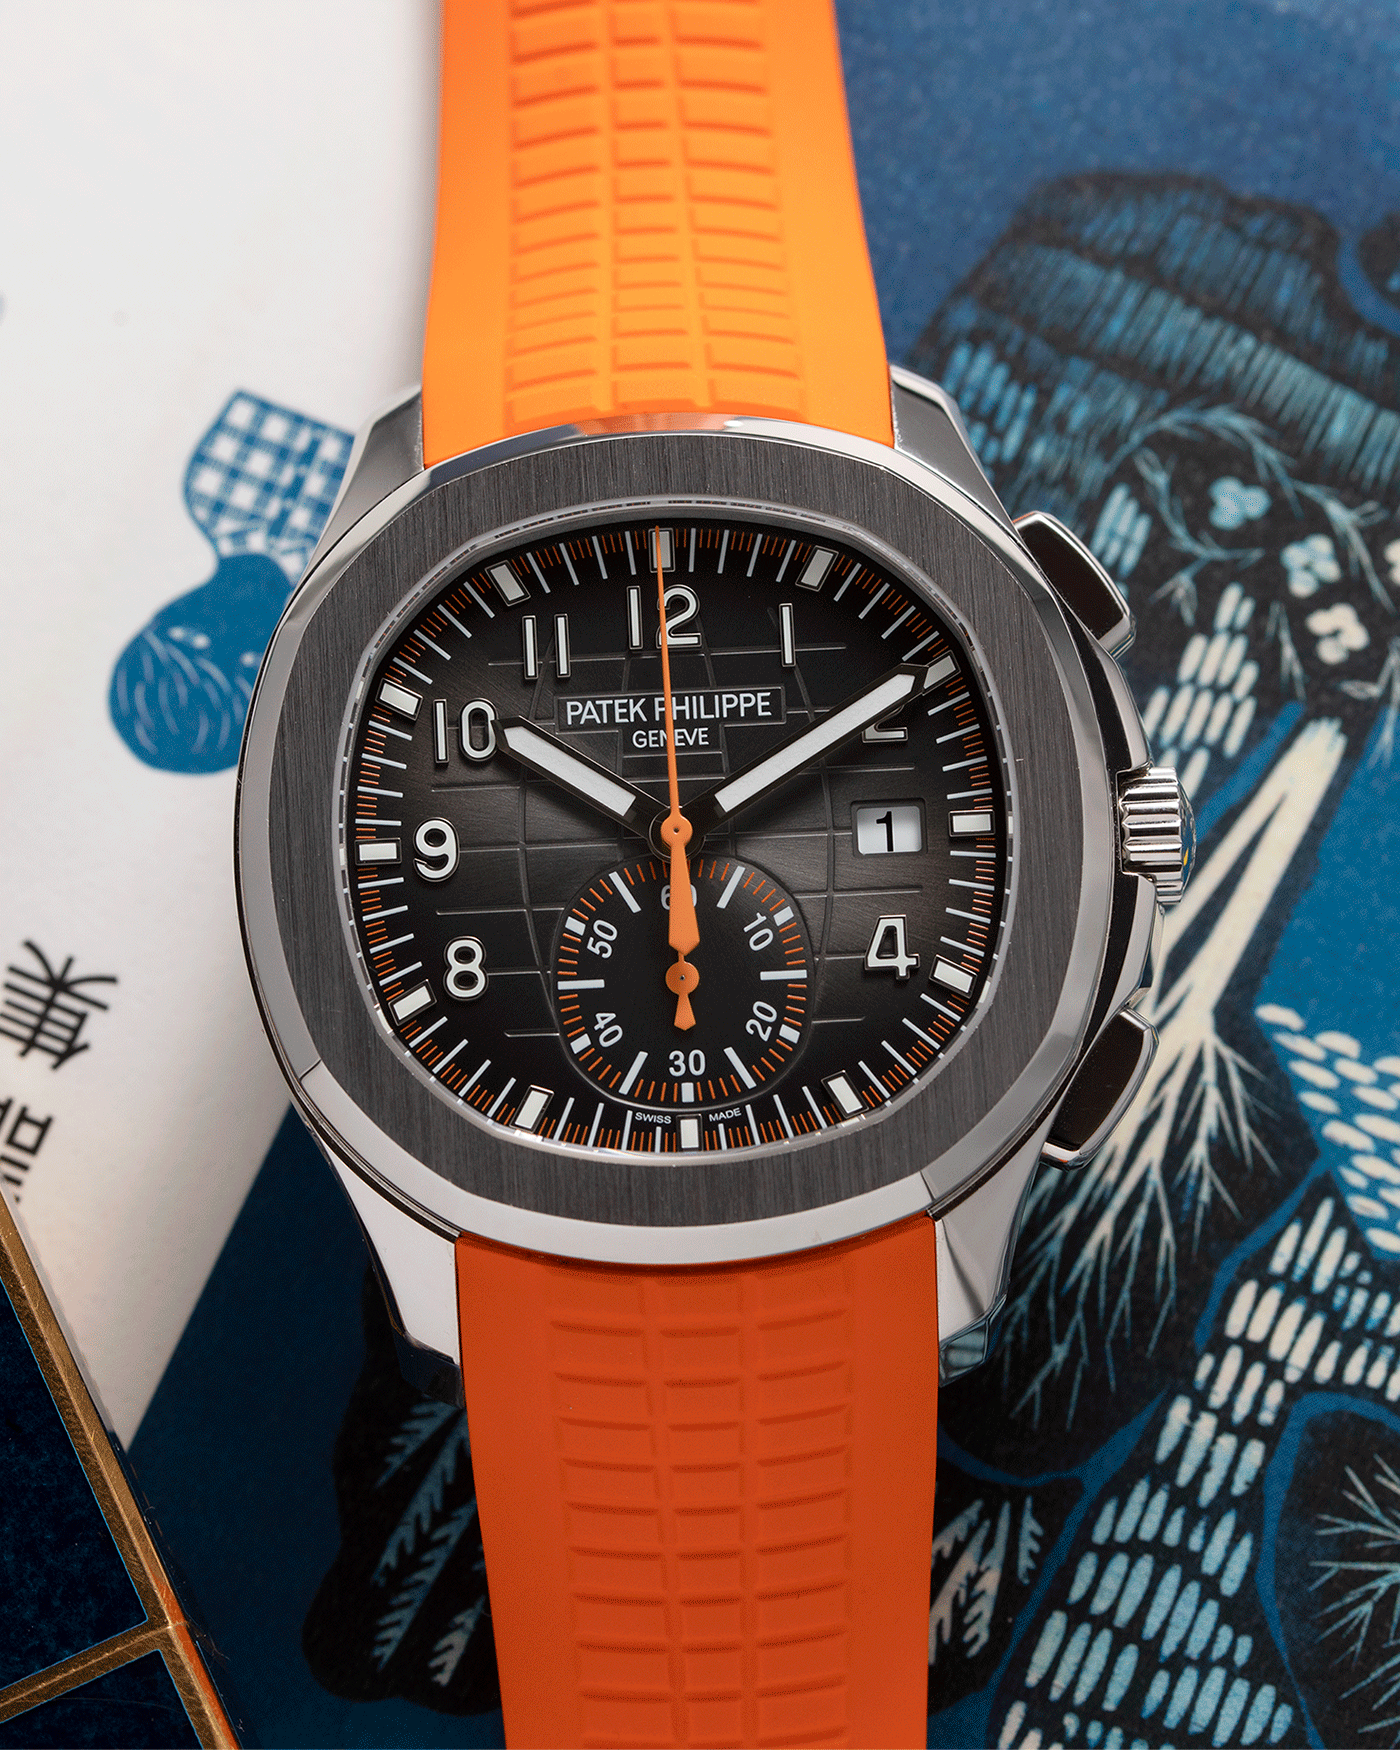 Brand: Patek Philippe Year: 2019 Model: Aquanaut Reference Number: 59689A Material: Stainless Steel Movement: Self Winding Patek Philippe Caliber CH 28-250 C Case Diameter: 42mm Strap: Patek Philippe Aquanaut Orange Rubber Strap and Two Additional Uncut Black and Orange Rubber Straps